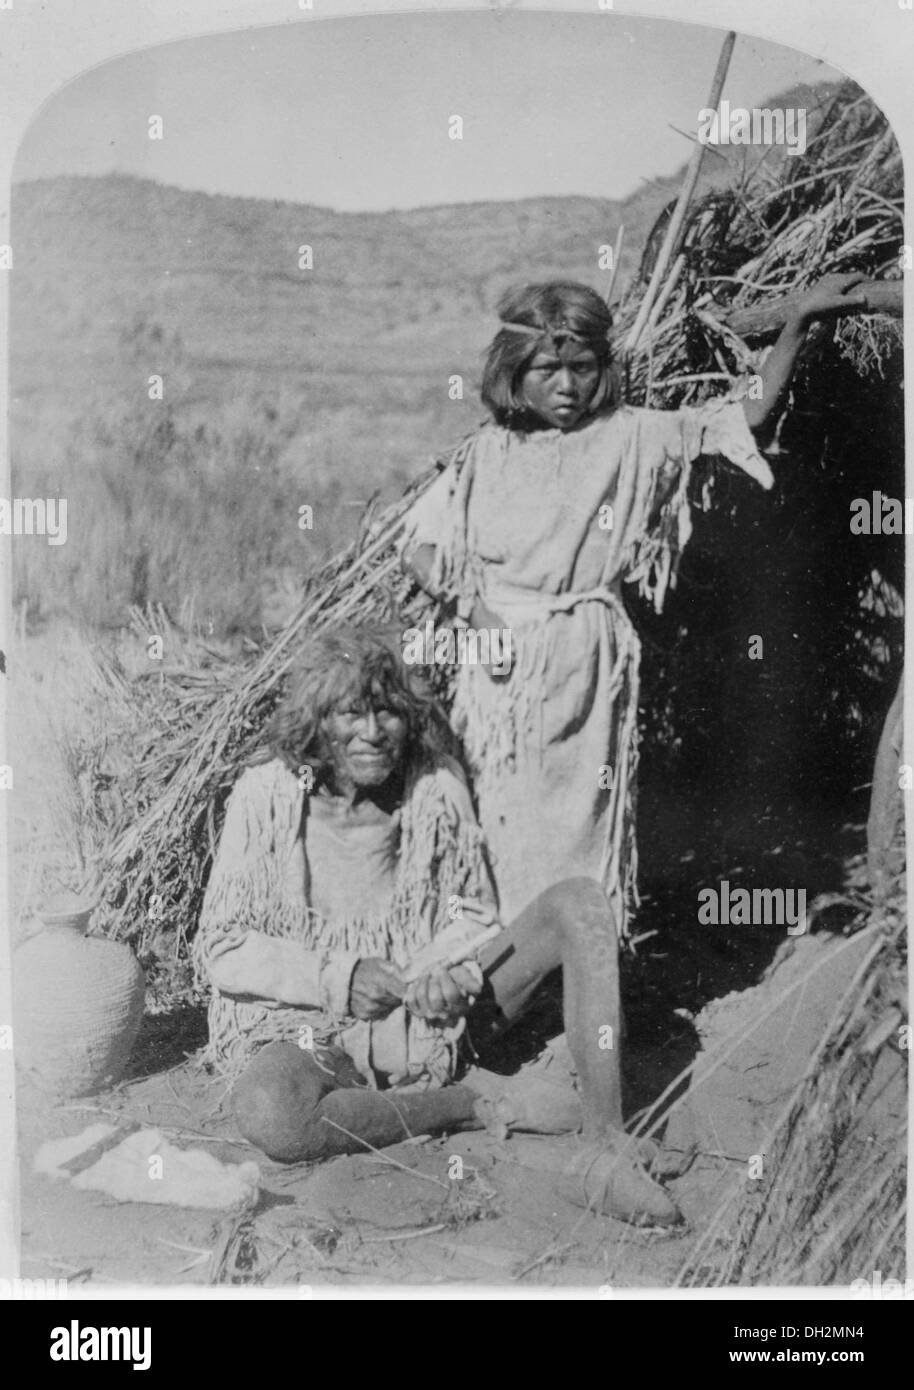 The Arrow Maker and his daughter, Kaivavit Paiutes, in front of their home, northern Arizona, 10-04-1872 517726 Stock Photo